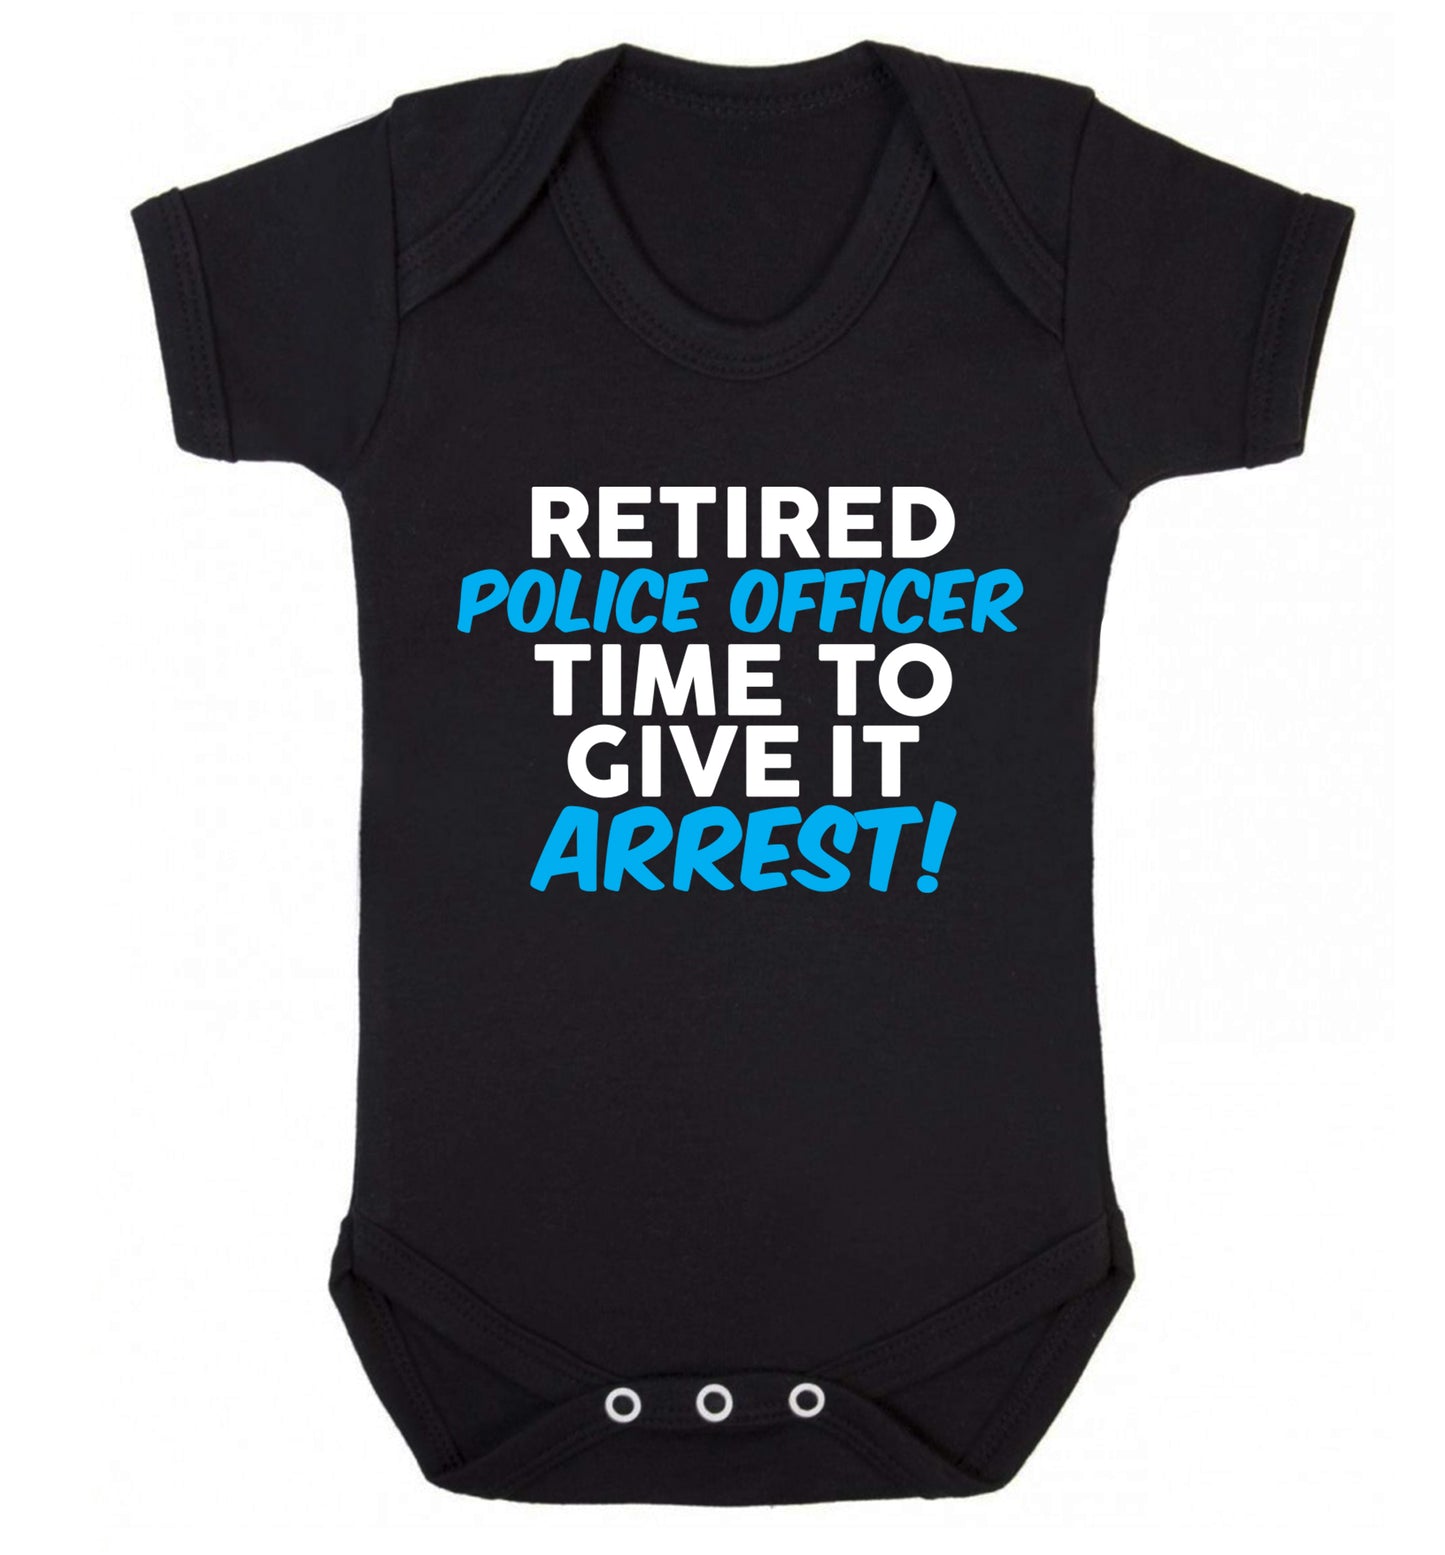 Retired police officer time to give it arrest Baby Vest black 18-24 months